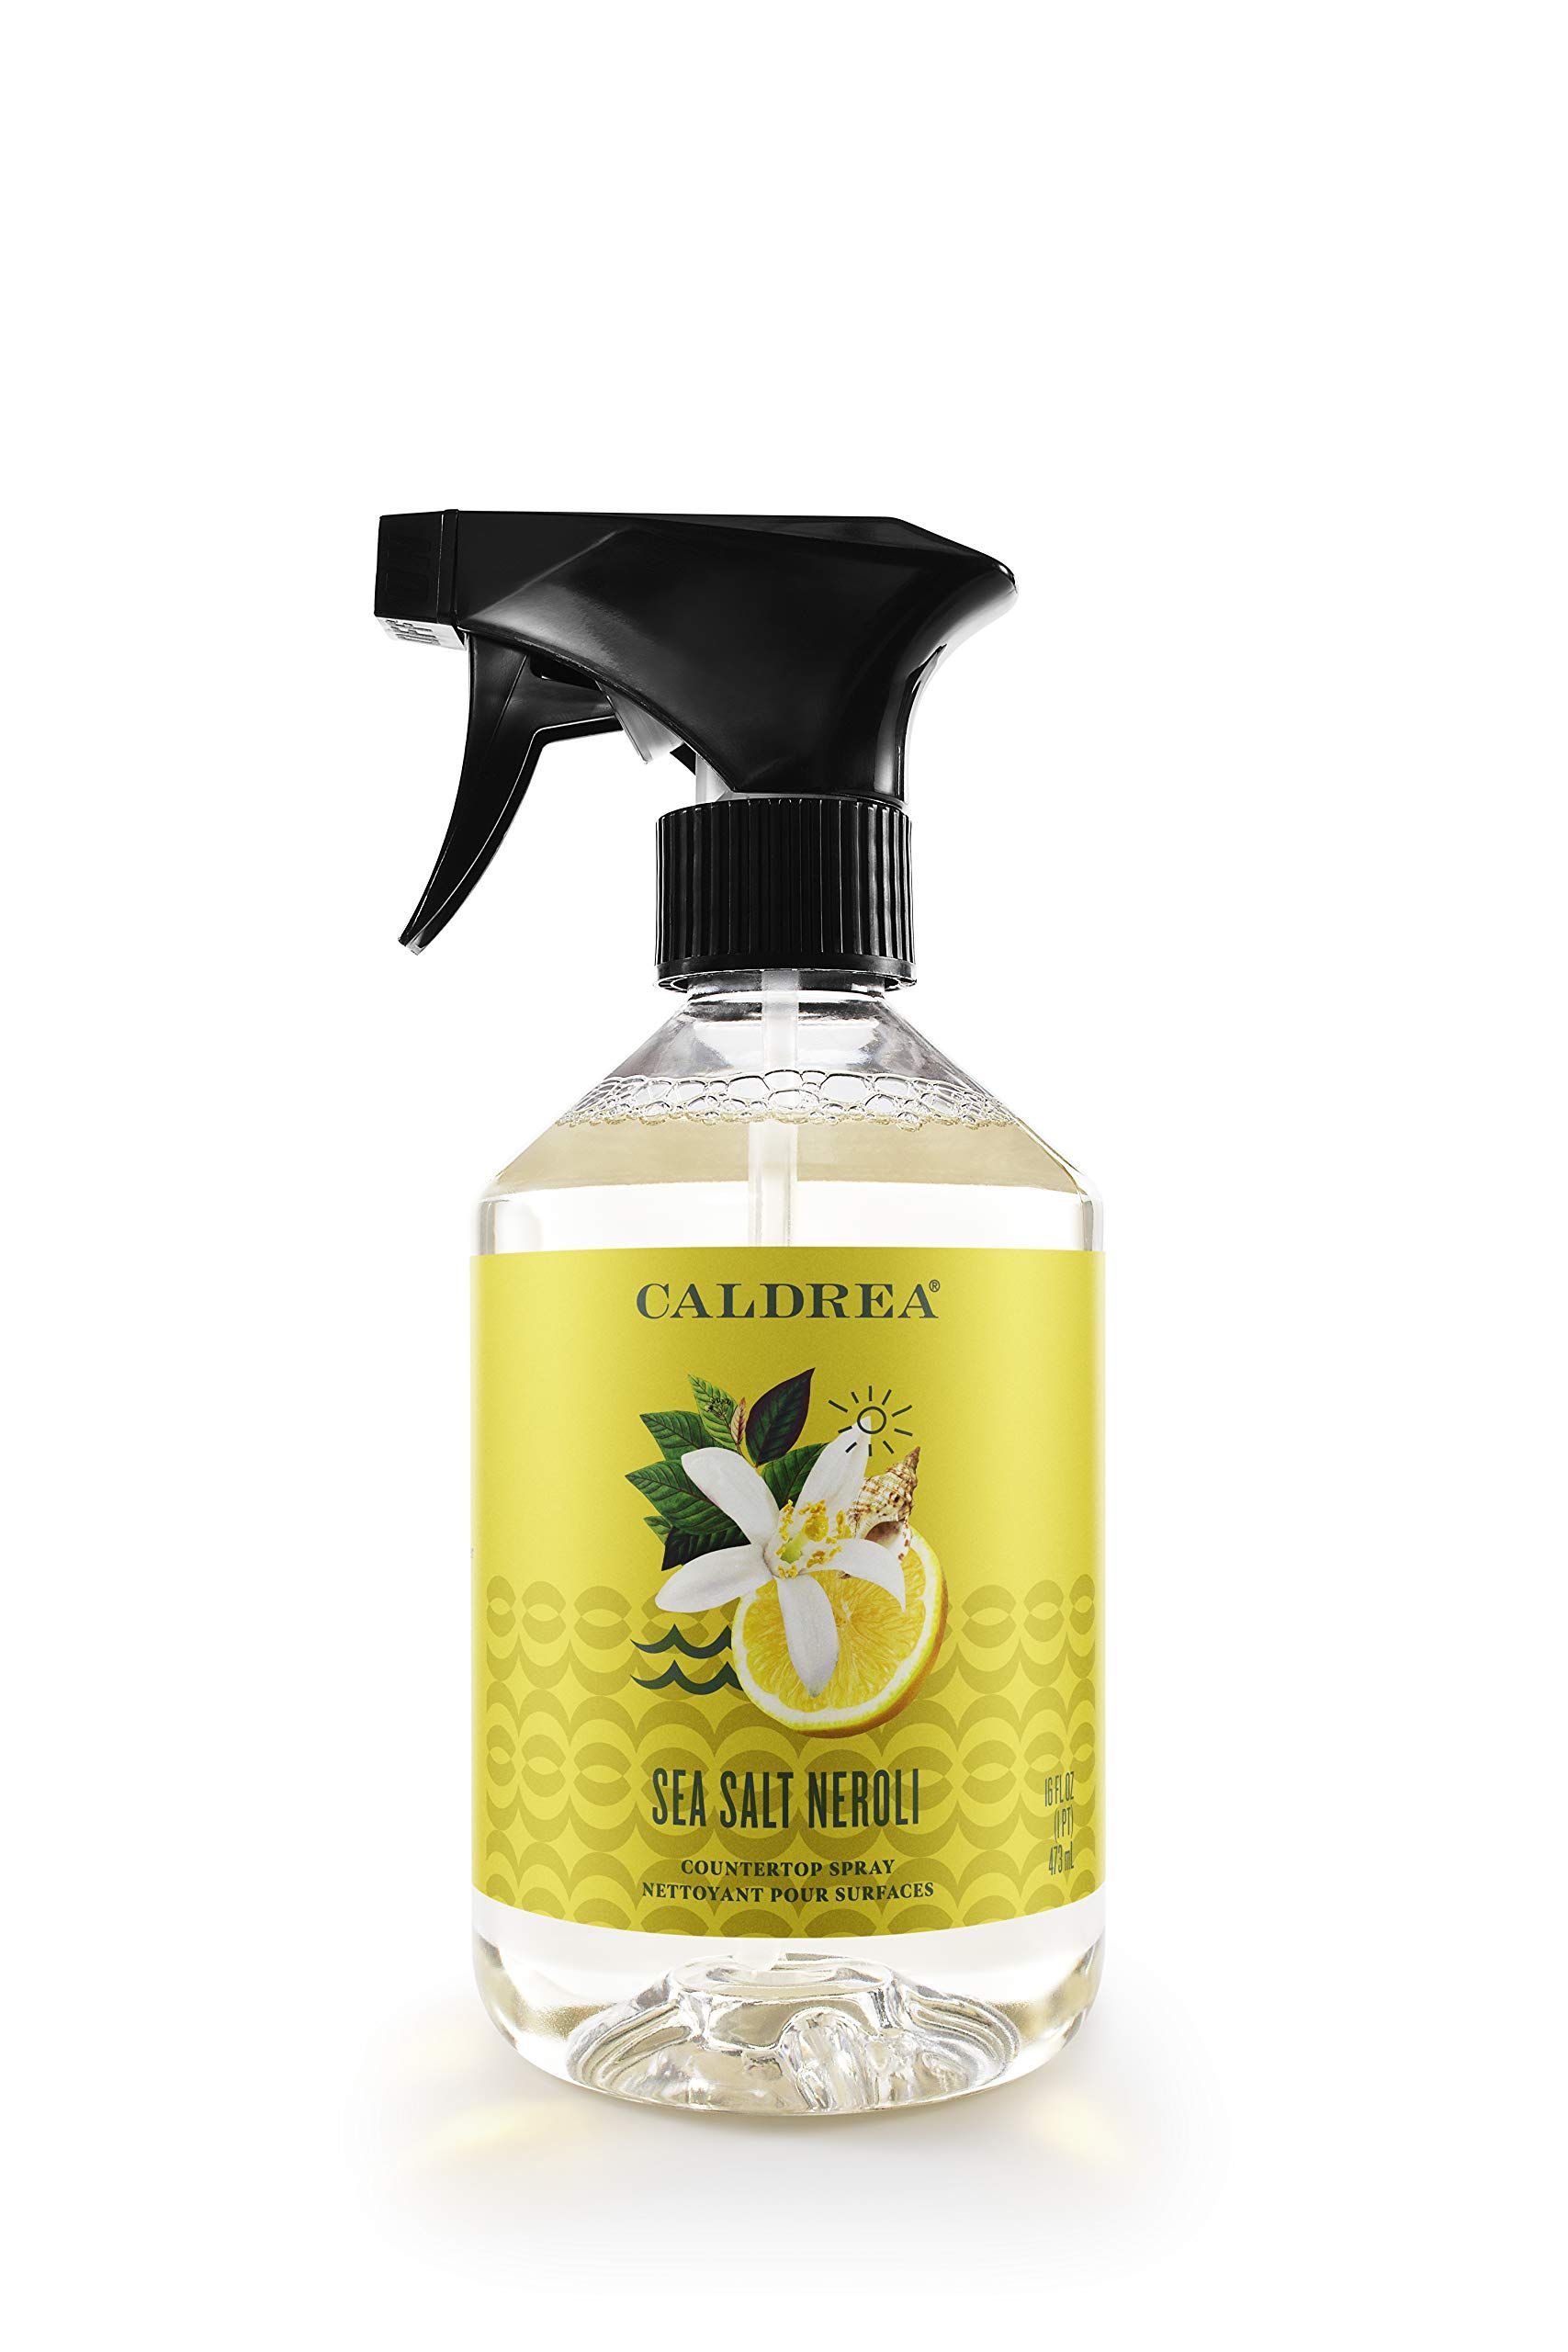 Caldrea Multi-surface Countertop Spray Cleaner, Made with Vegetable Protein Extract, Sea Salt Neroli | Amazon (US)